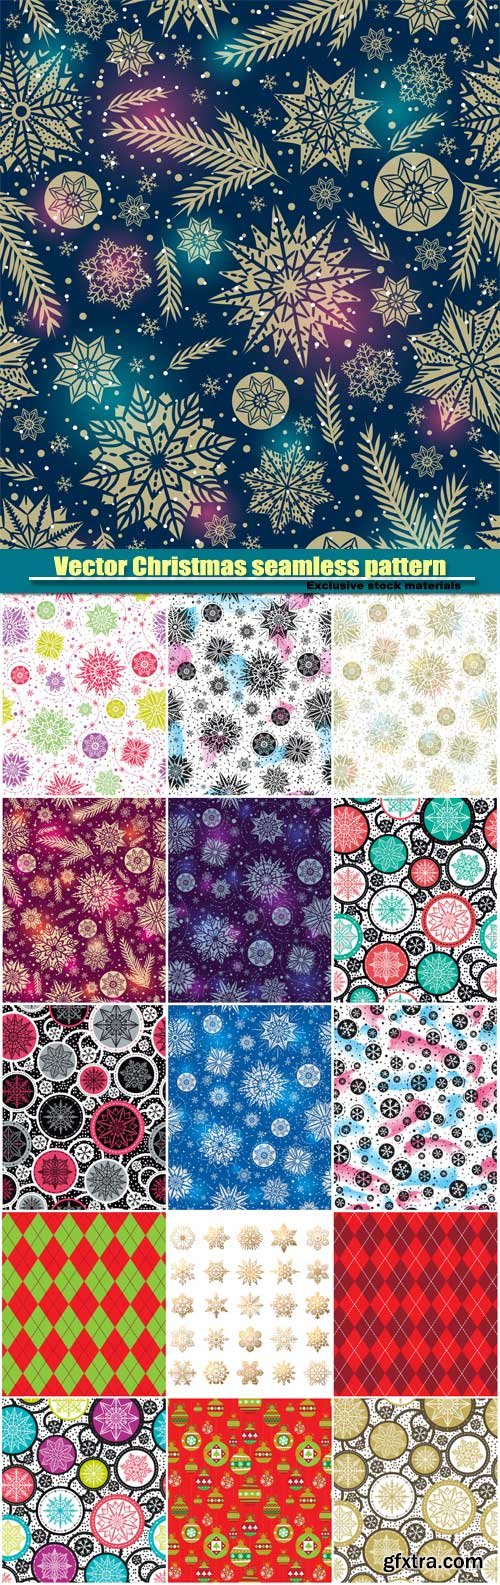 Vector Christmas seamless pattern background with snowflakes and stars